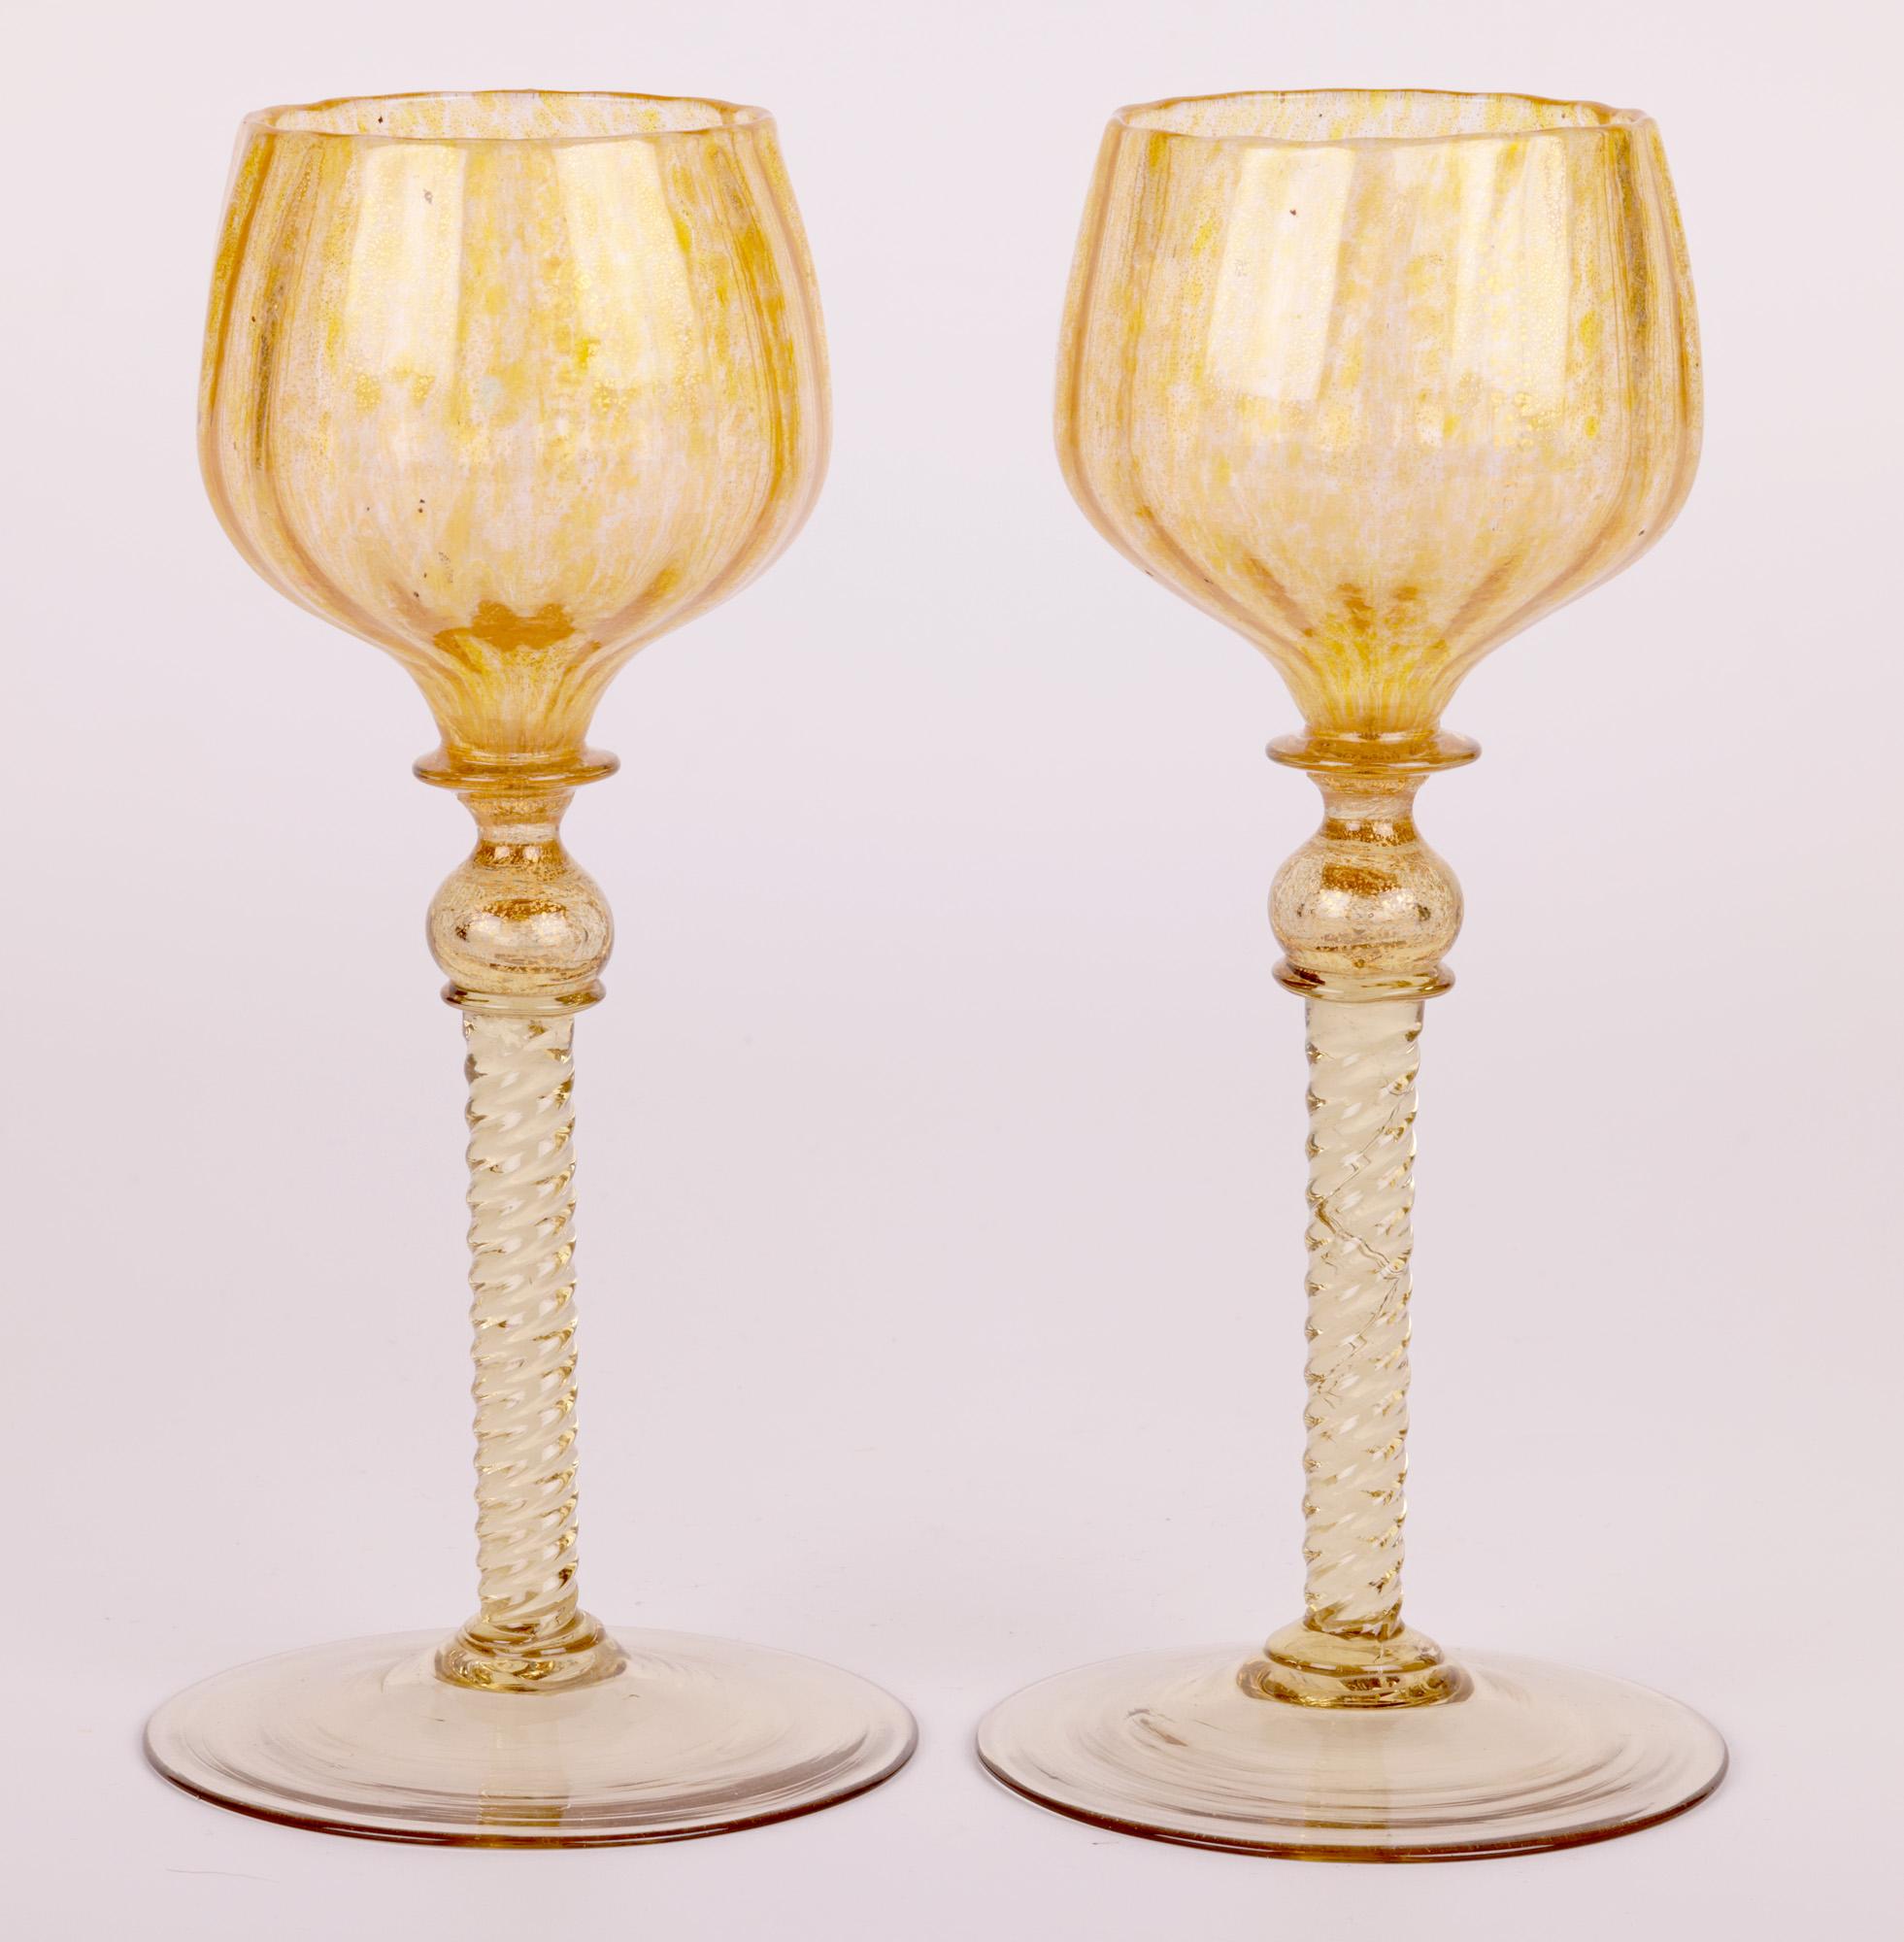 A stunning and unusual set six Venetian Murano wine glasses with bud shaped tops attributed to Antonio Salviati and dating from the early 20th century. The hand-blown glasses have round ribbed pattern bowls with yellow tinting and gold aventurine